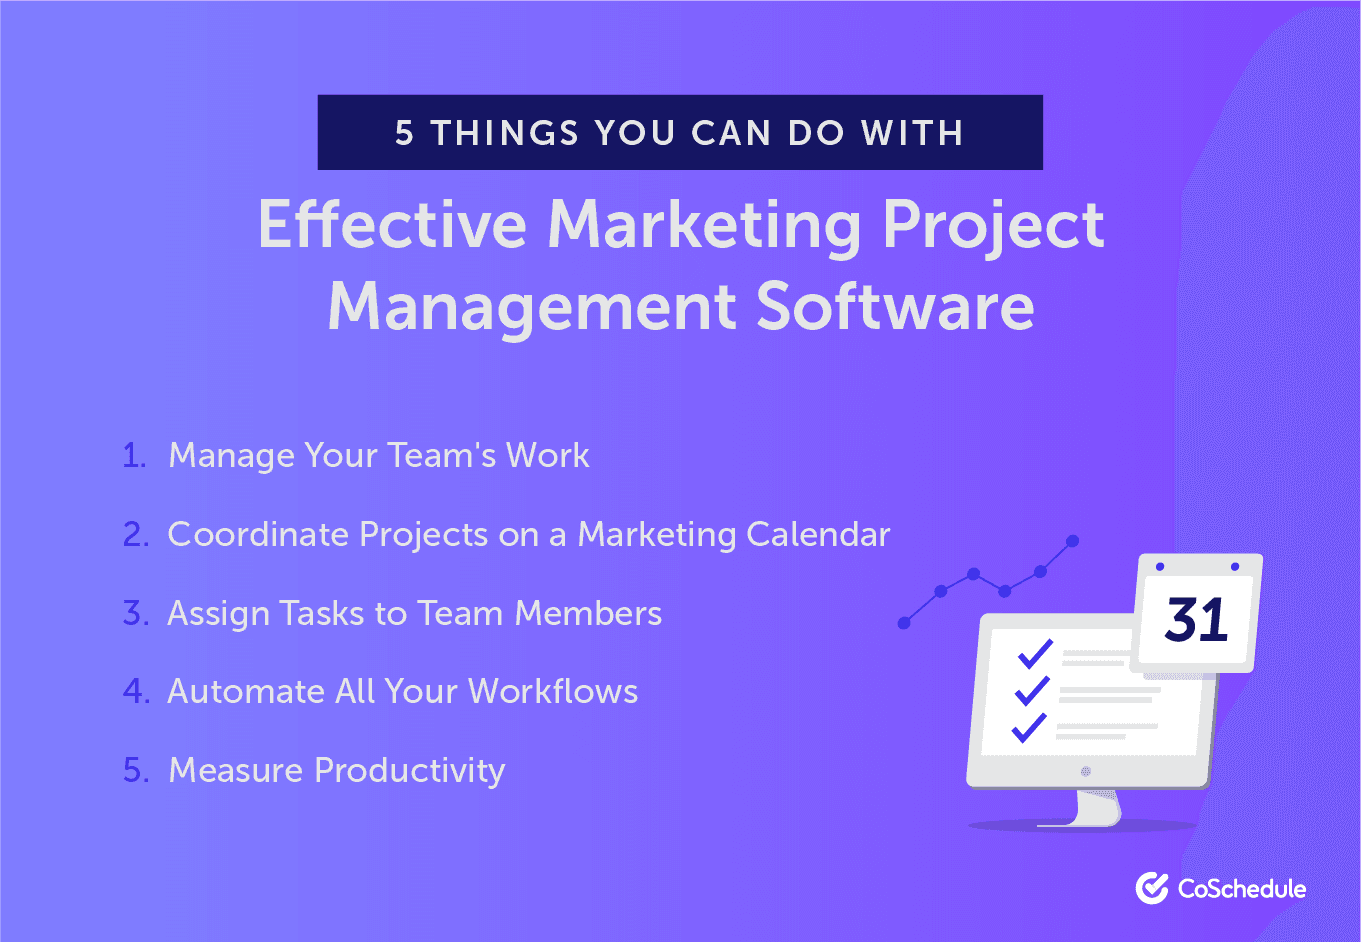 Marketing Project Management Software: How to Choose the Best Option